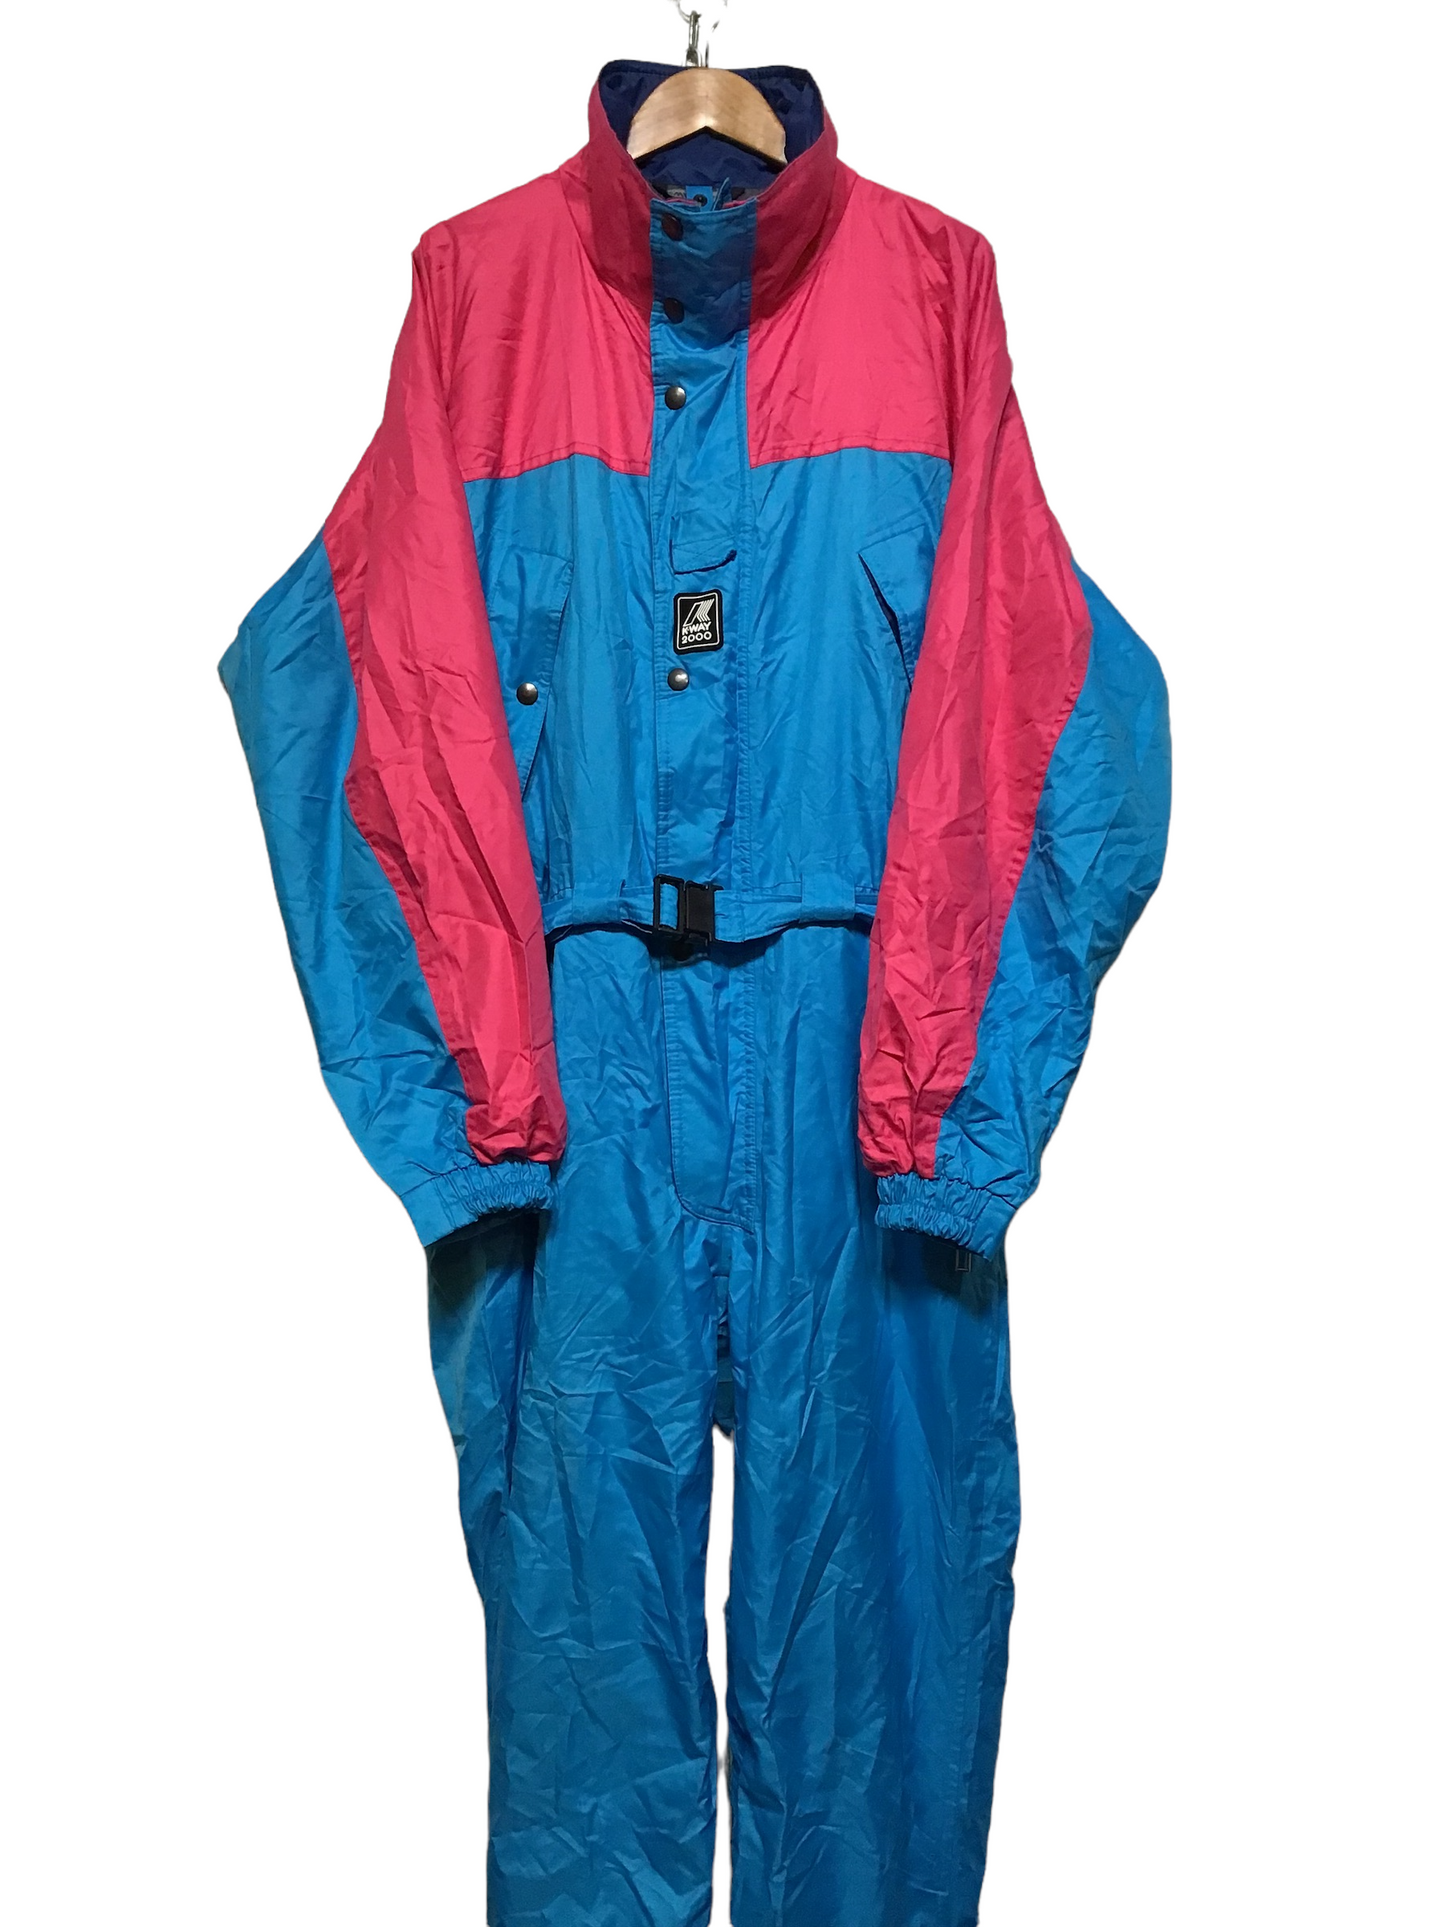 Pink And Blue K Way 2000 Ski Suit (Size XXL)